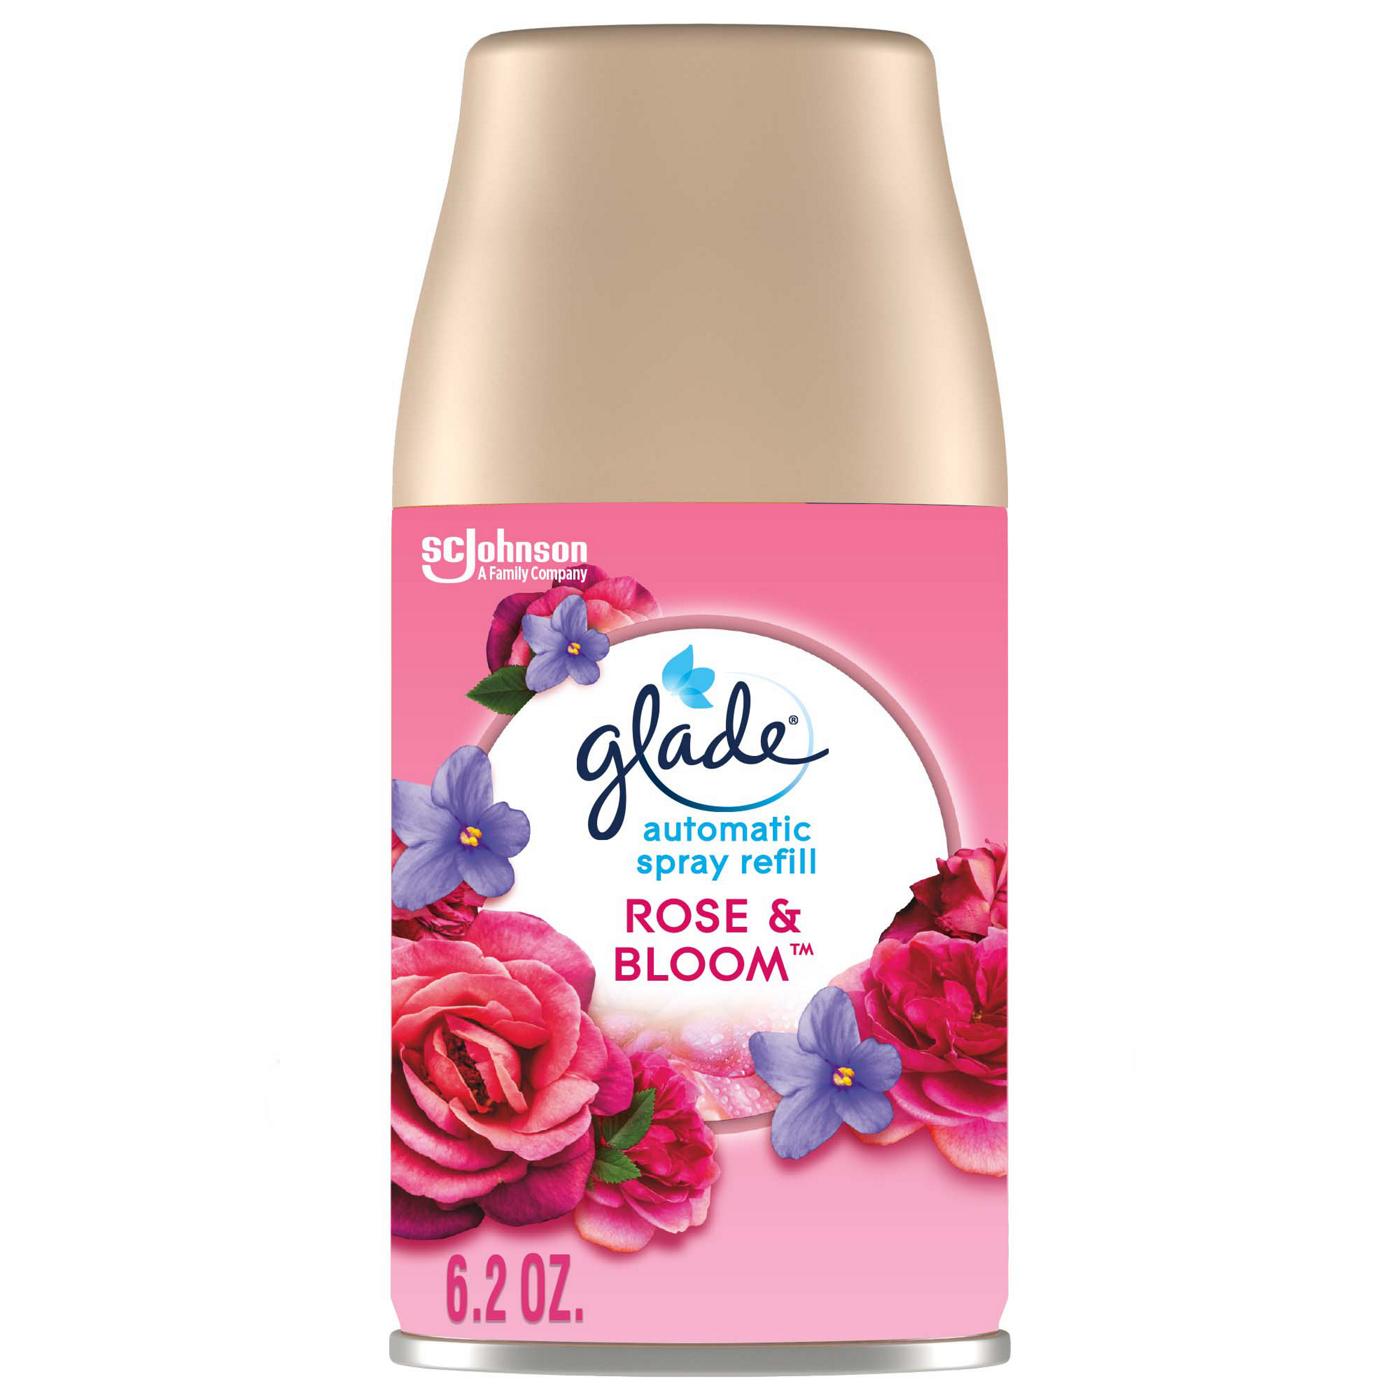 Glade Automatic Spray Refill - Rose & Bloom; image 1 of 2